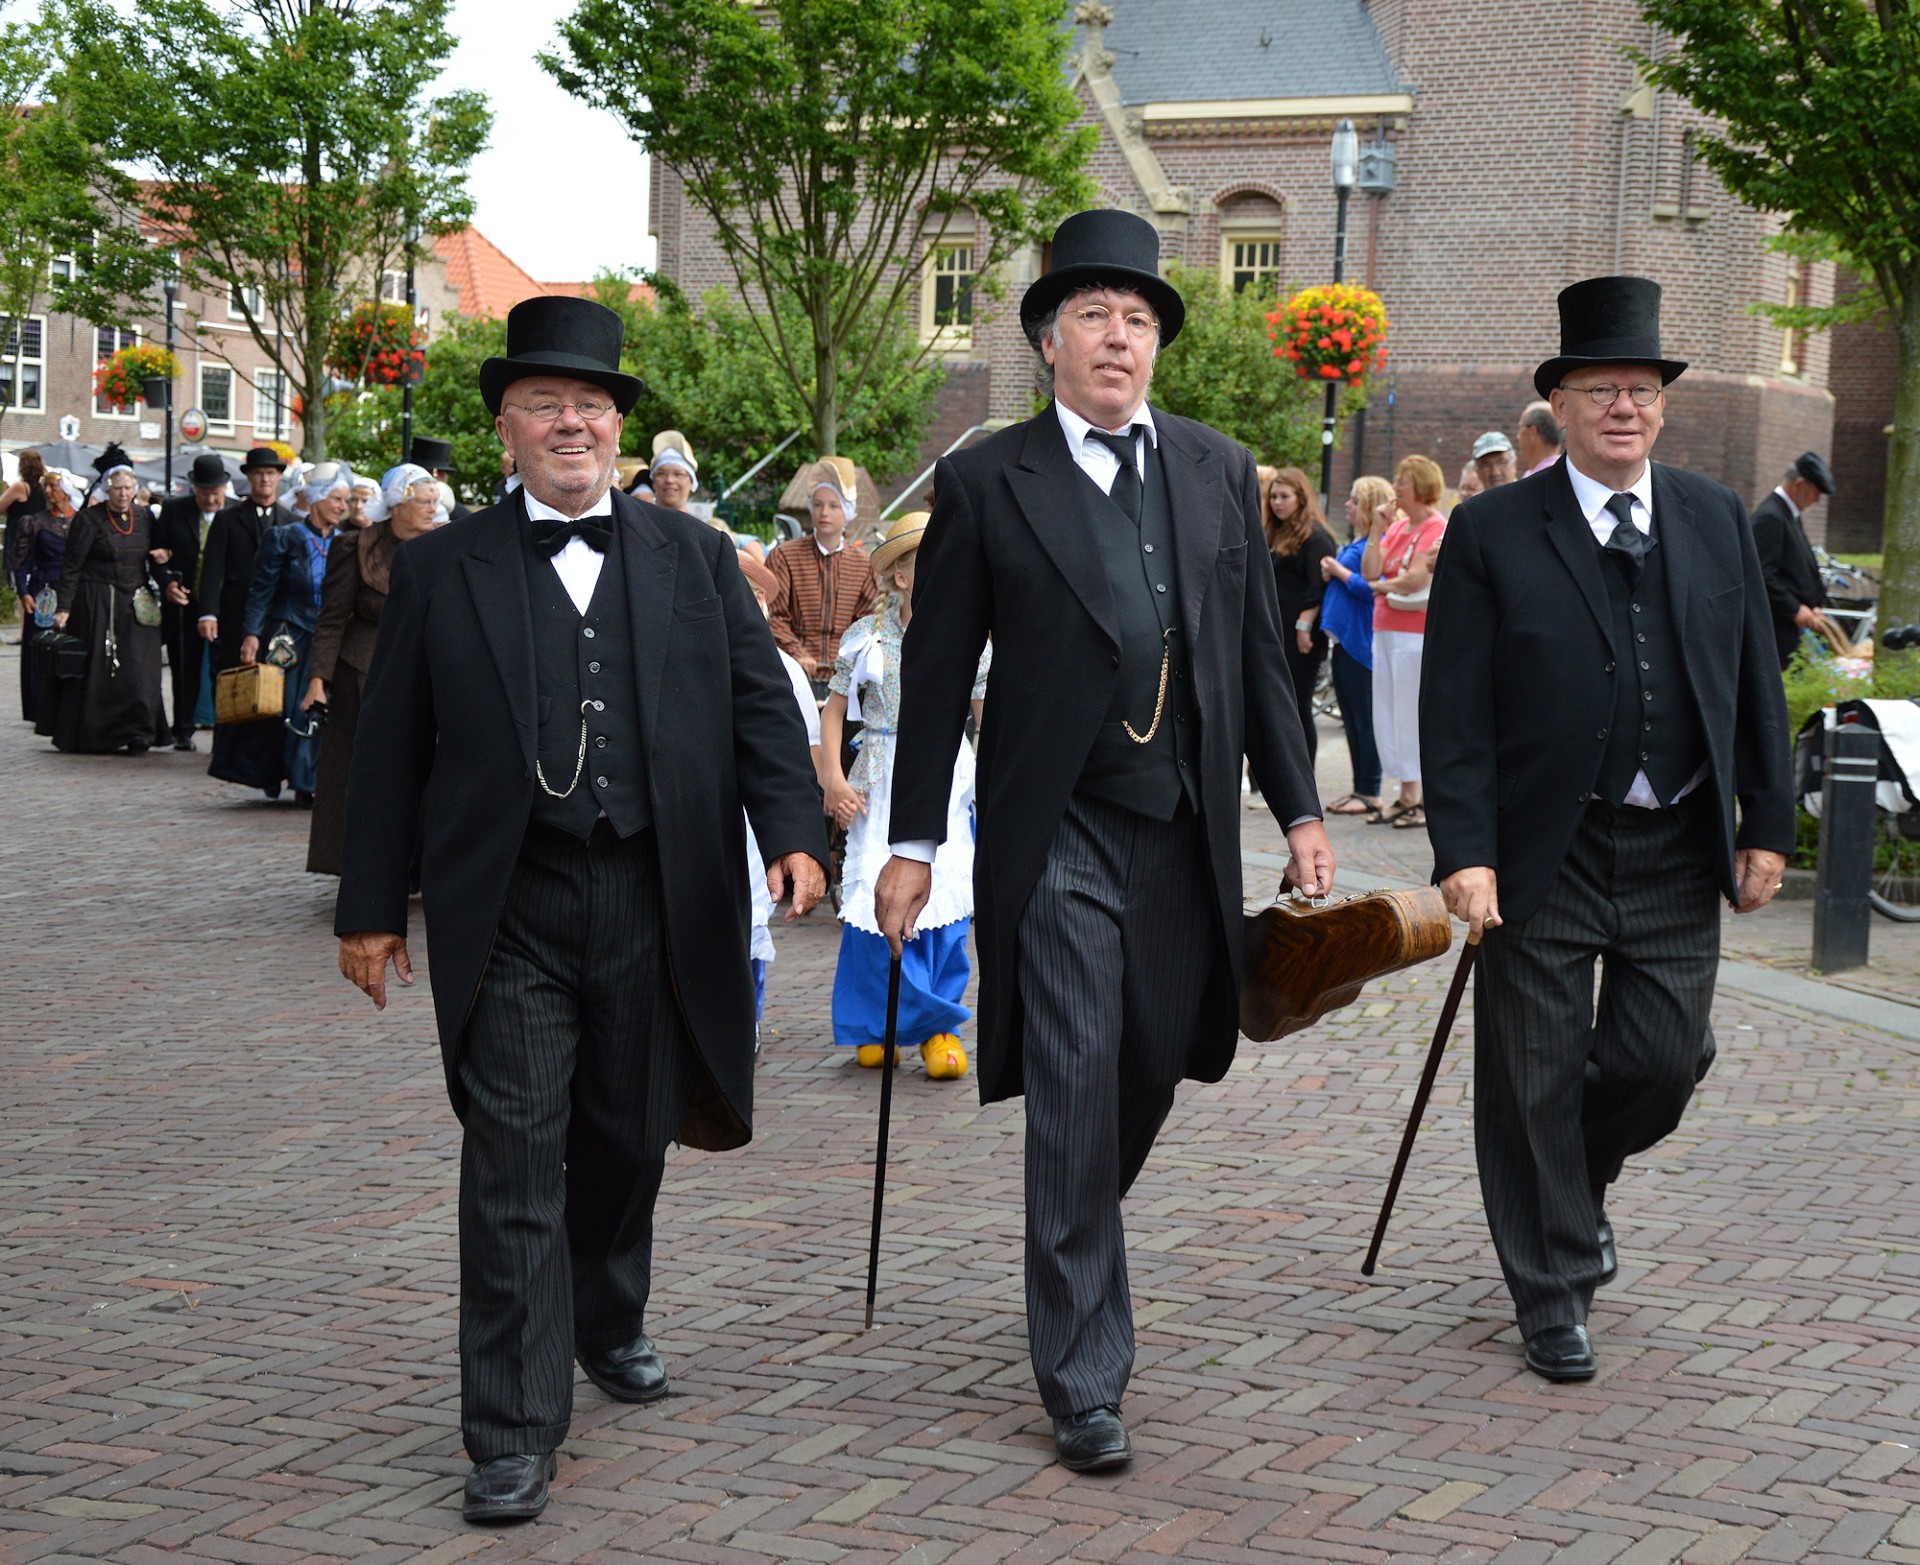 tradition holland clothing free photo